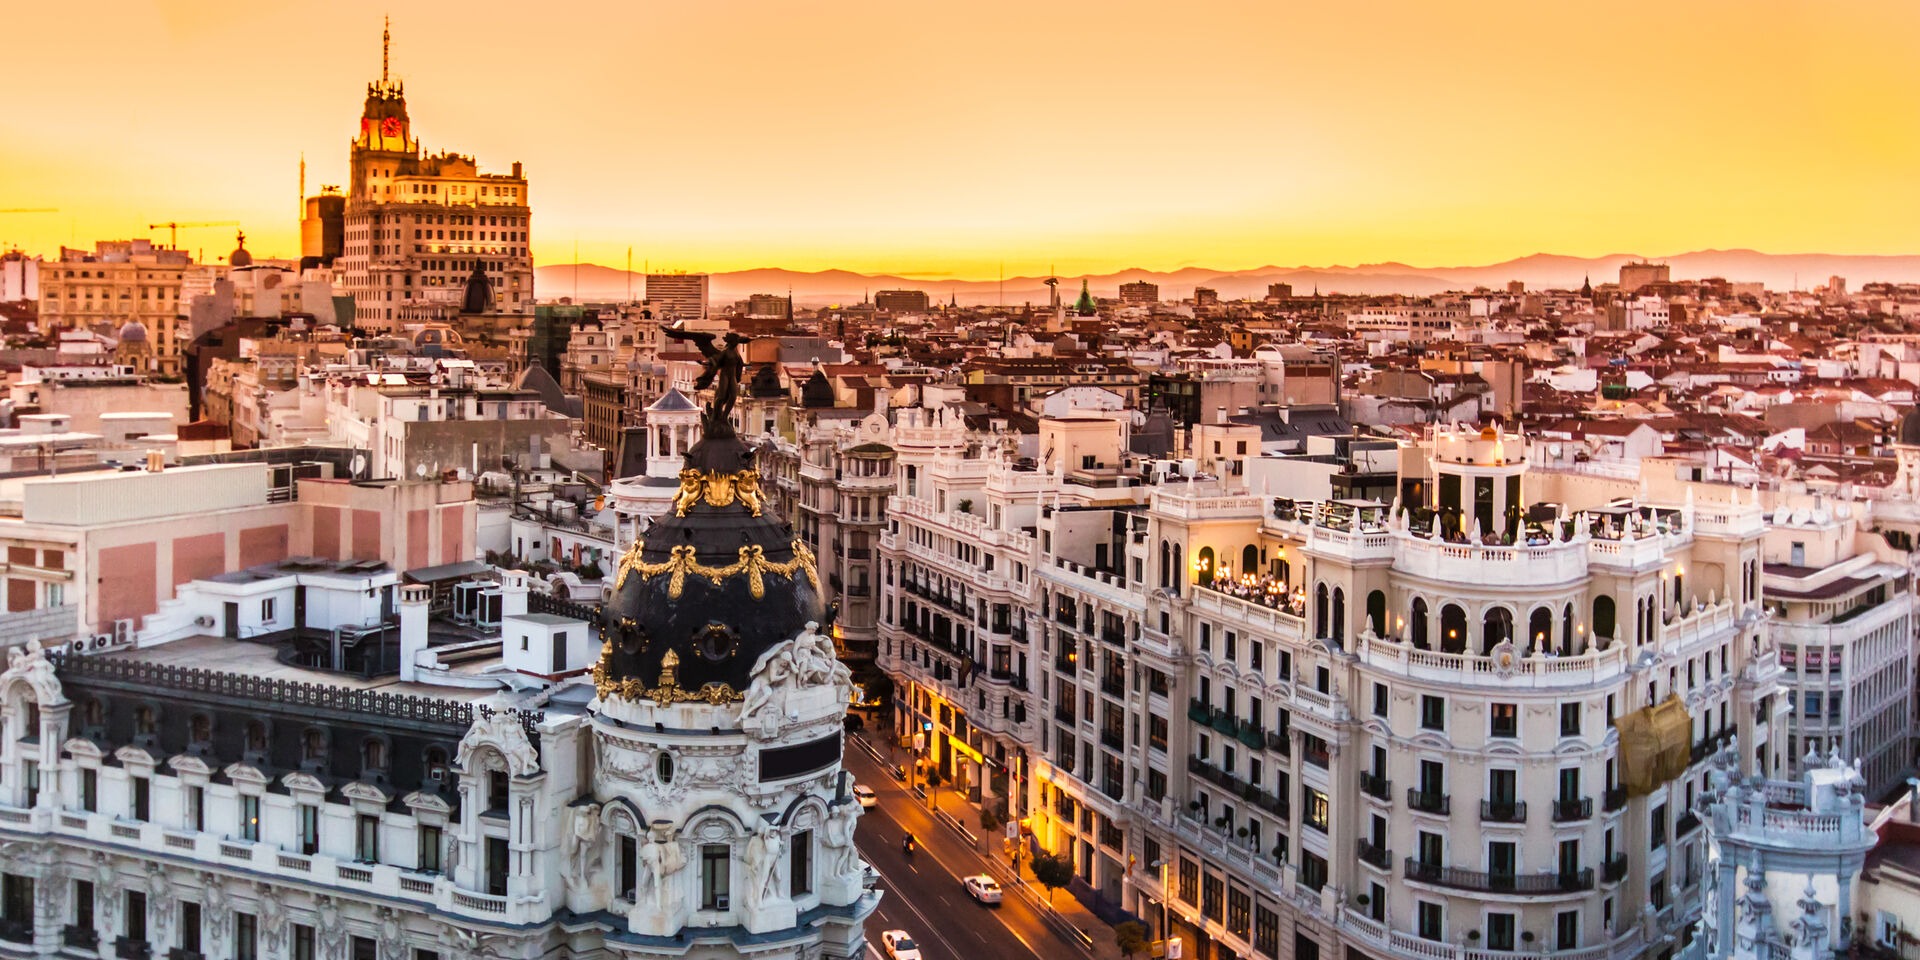 Steps to reserve your apartment for rent and enjoy Madrid for a few months!